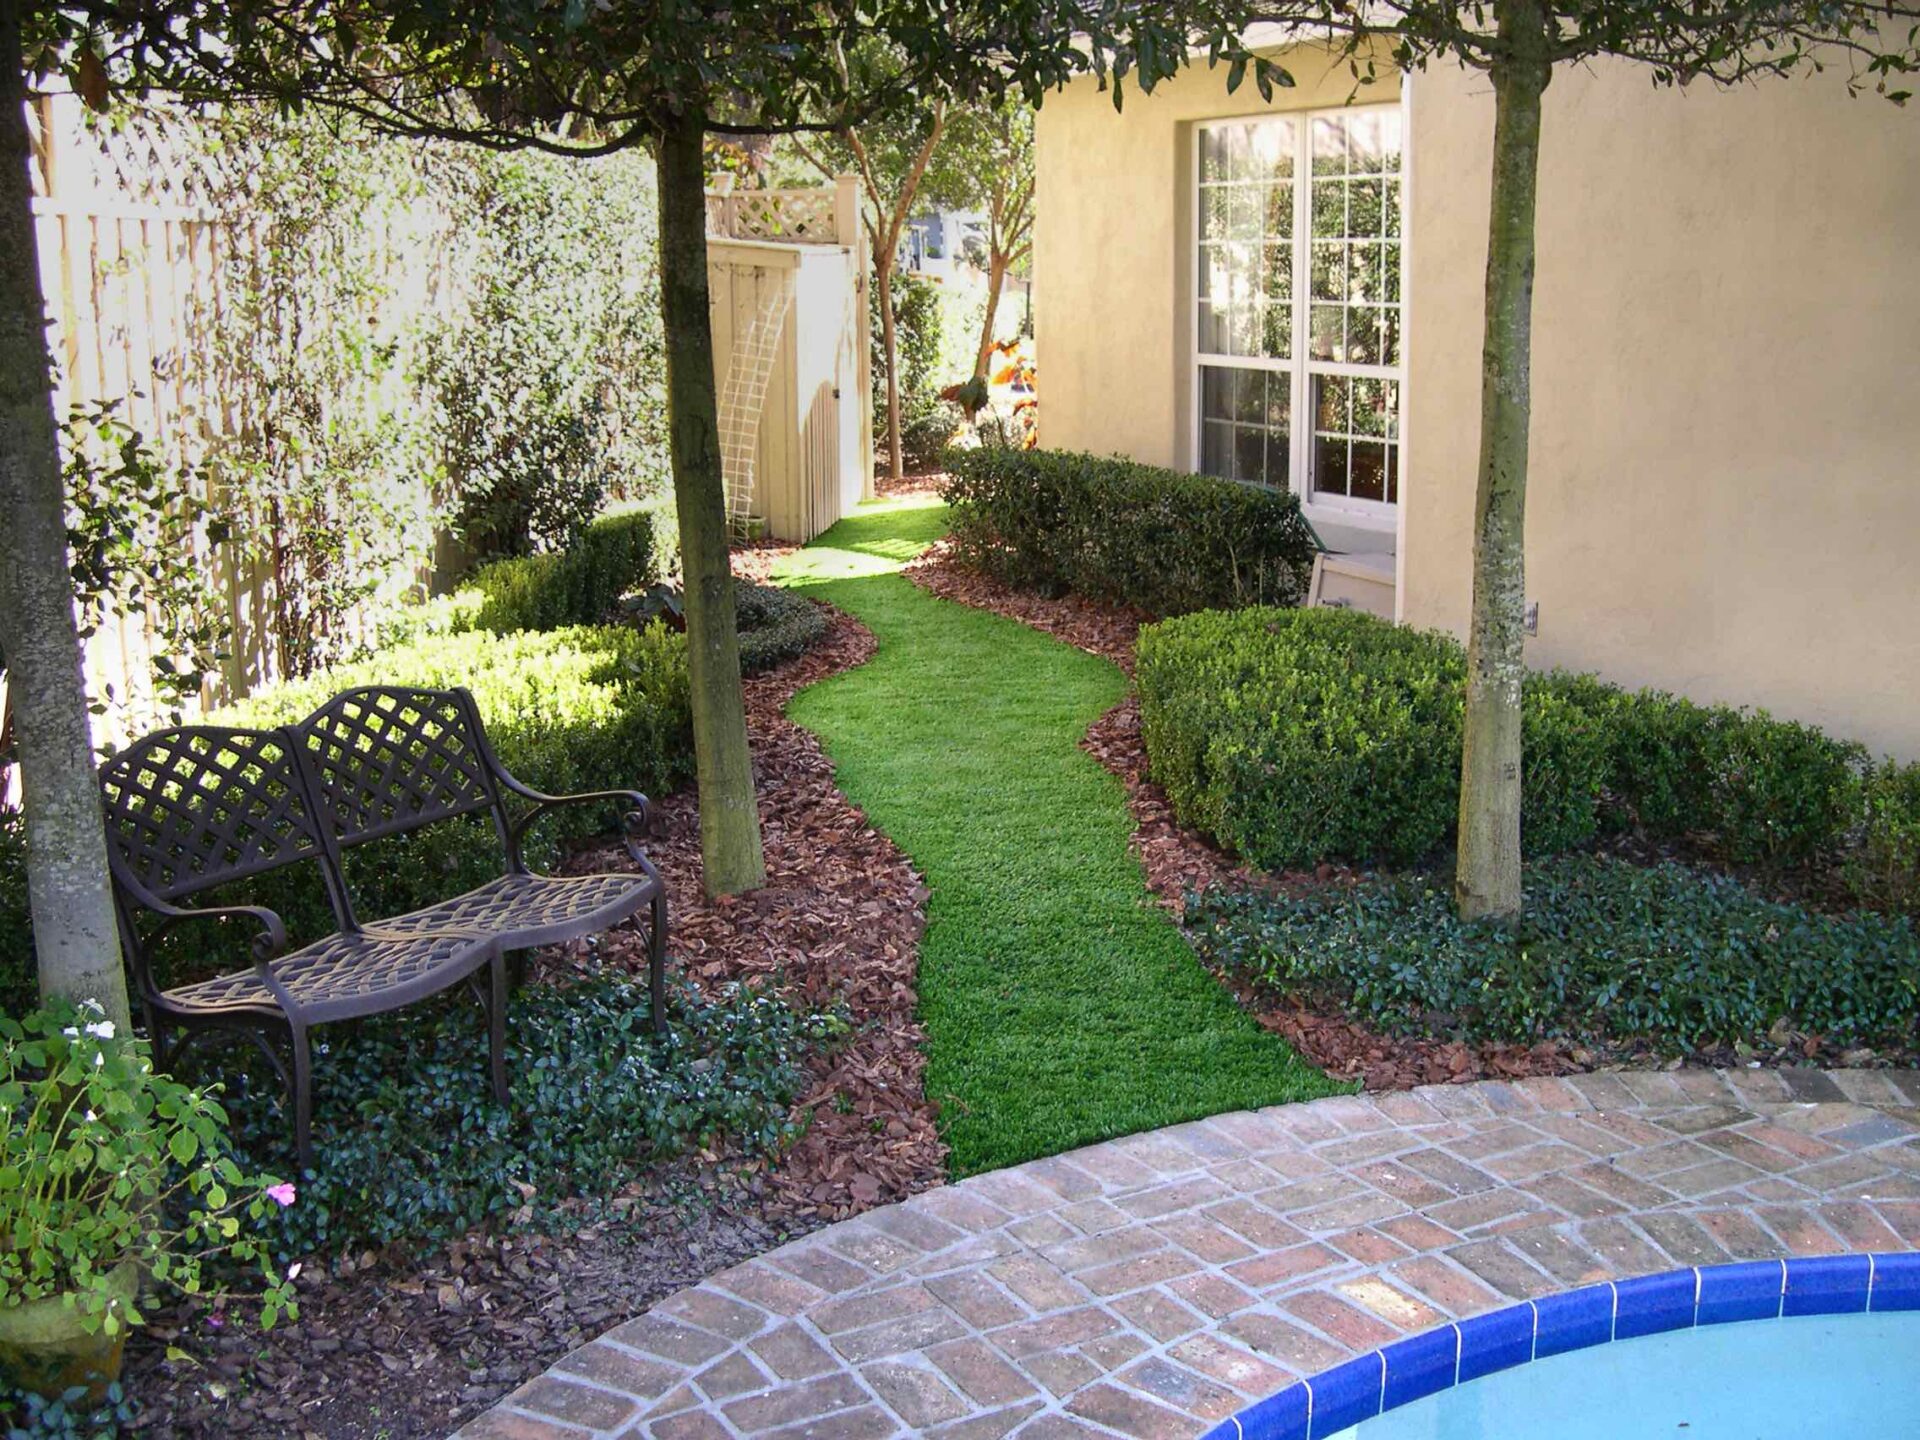 A tranquil garden scene with a curving grass path, pruned hedges, metal bench, and a section of blue pool in the foreground.